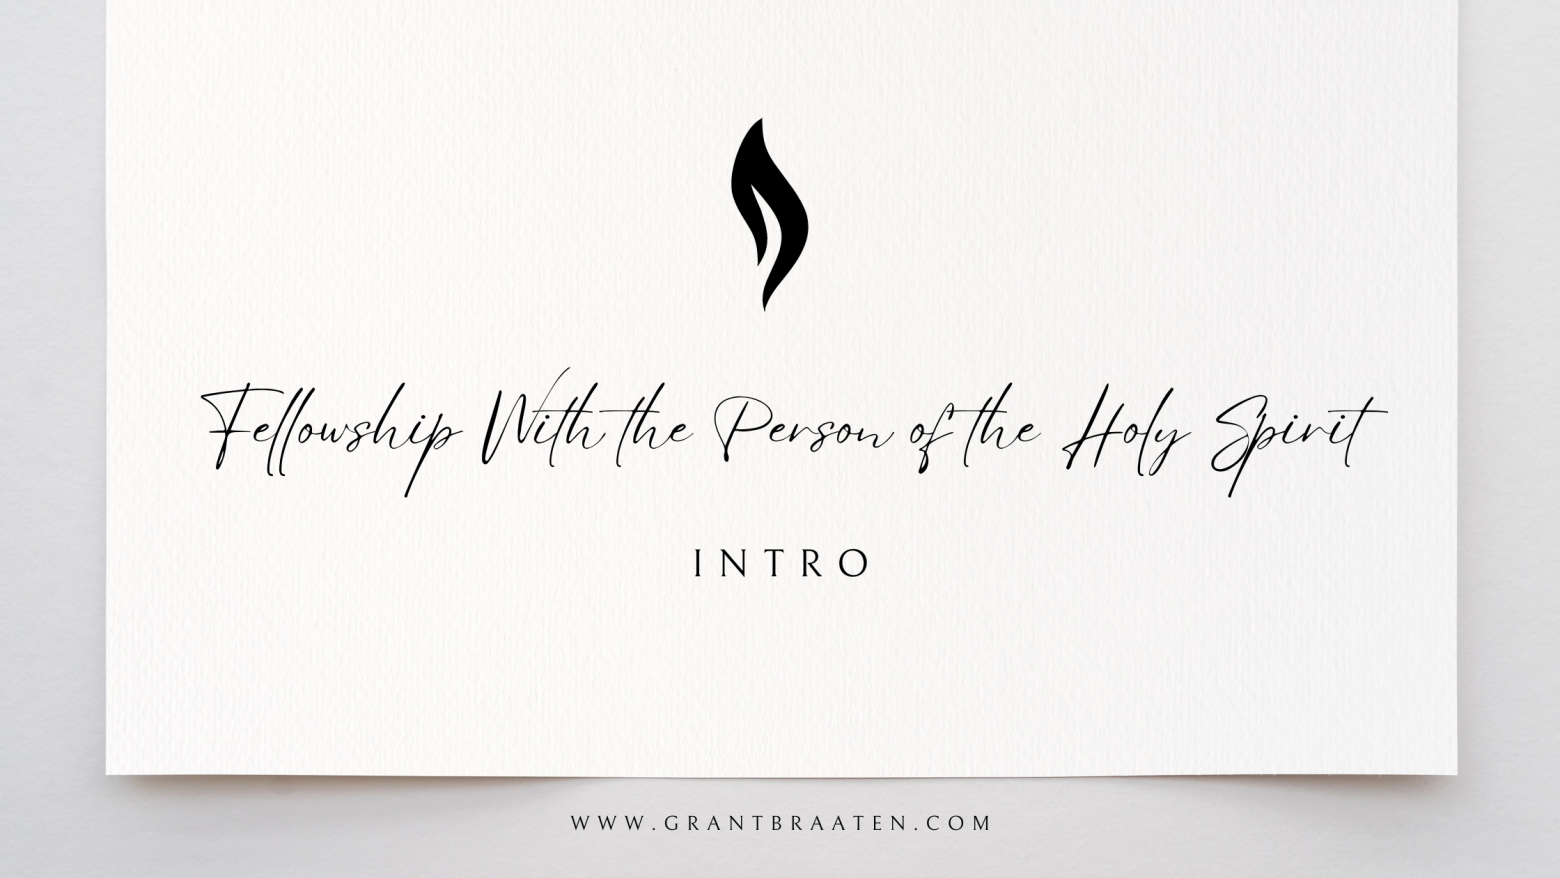 Fellowship With the Person of the Holy Spirit – Intro